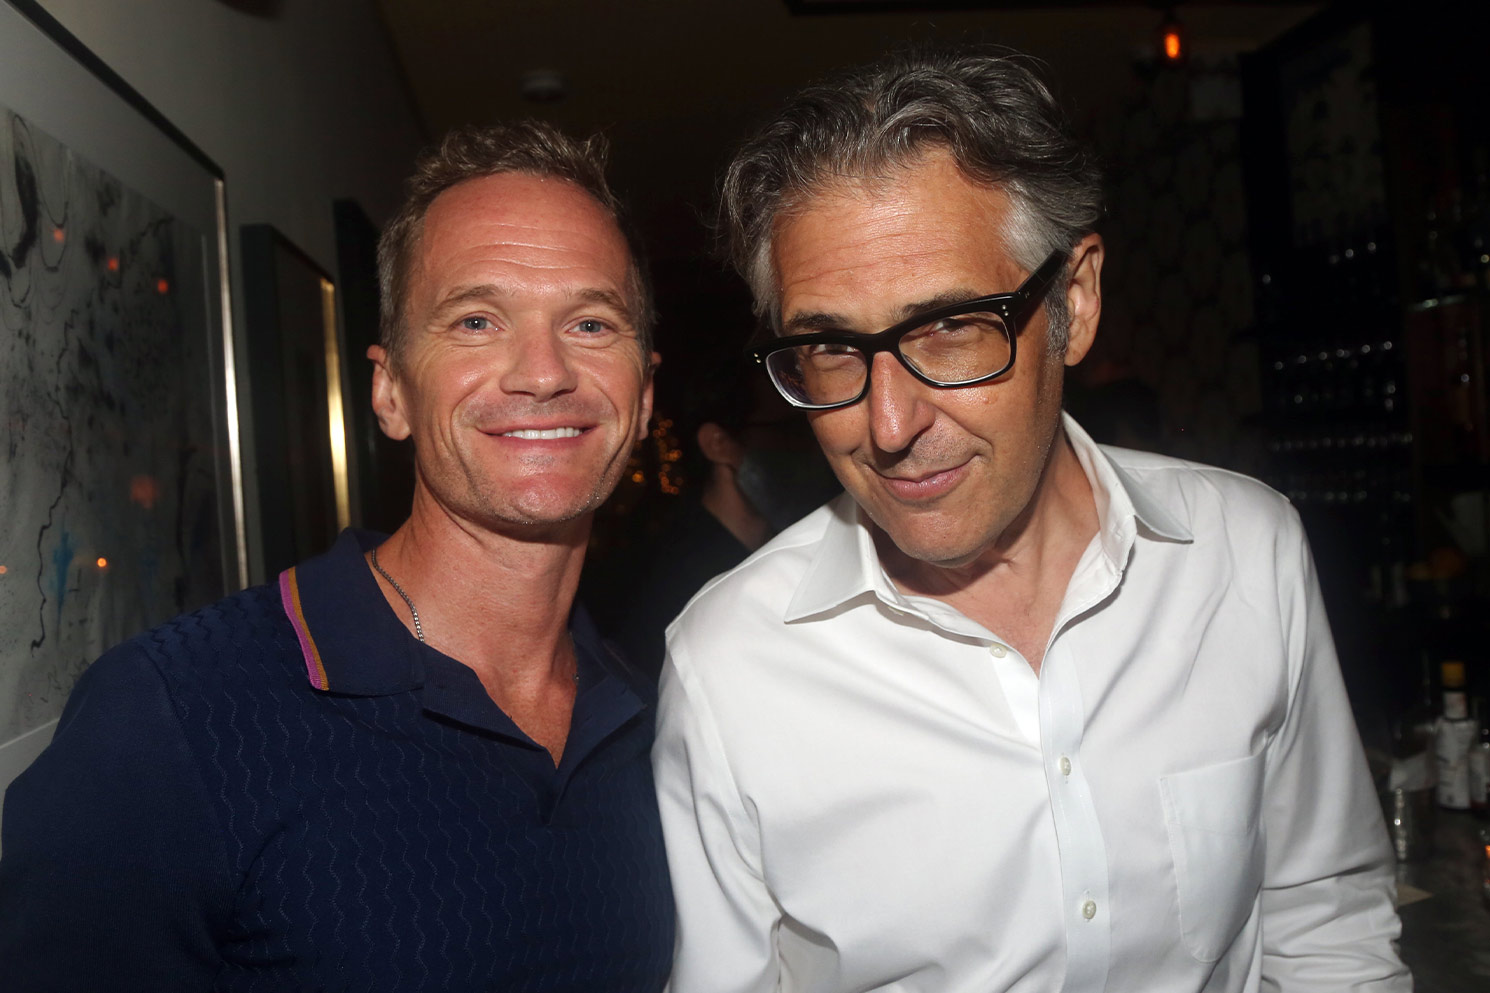 Neil Patrick Harris and Ira glass pose for photo at event together